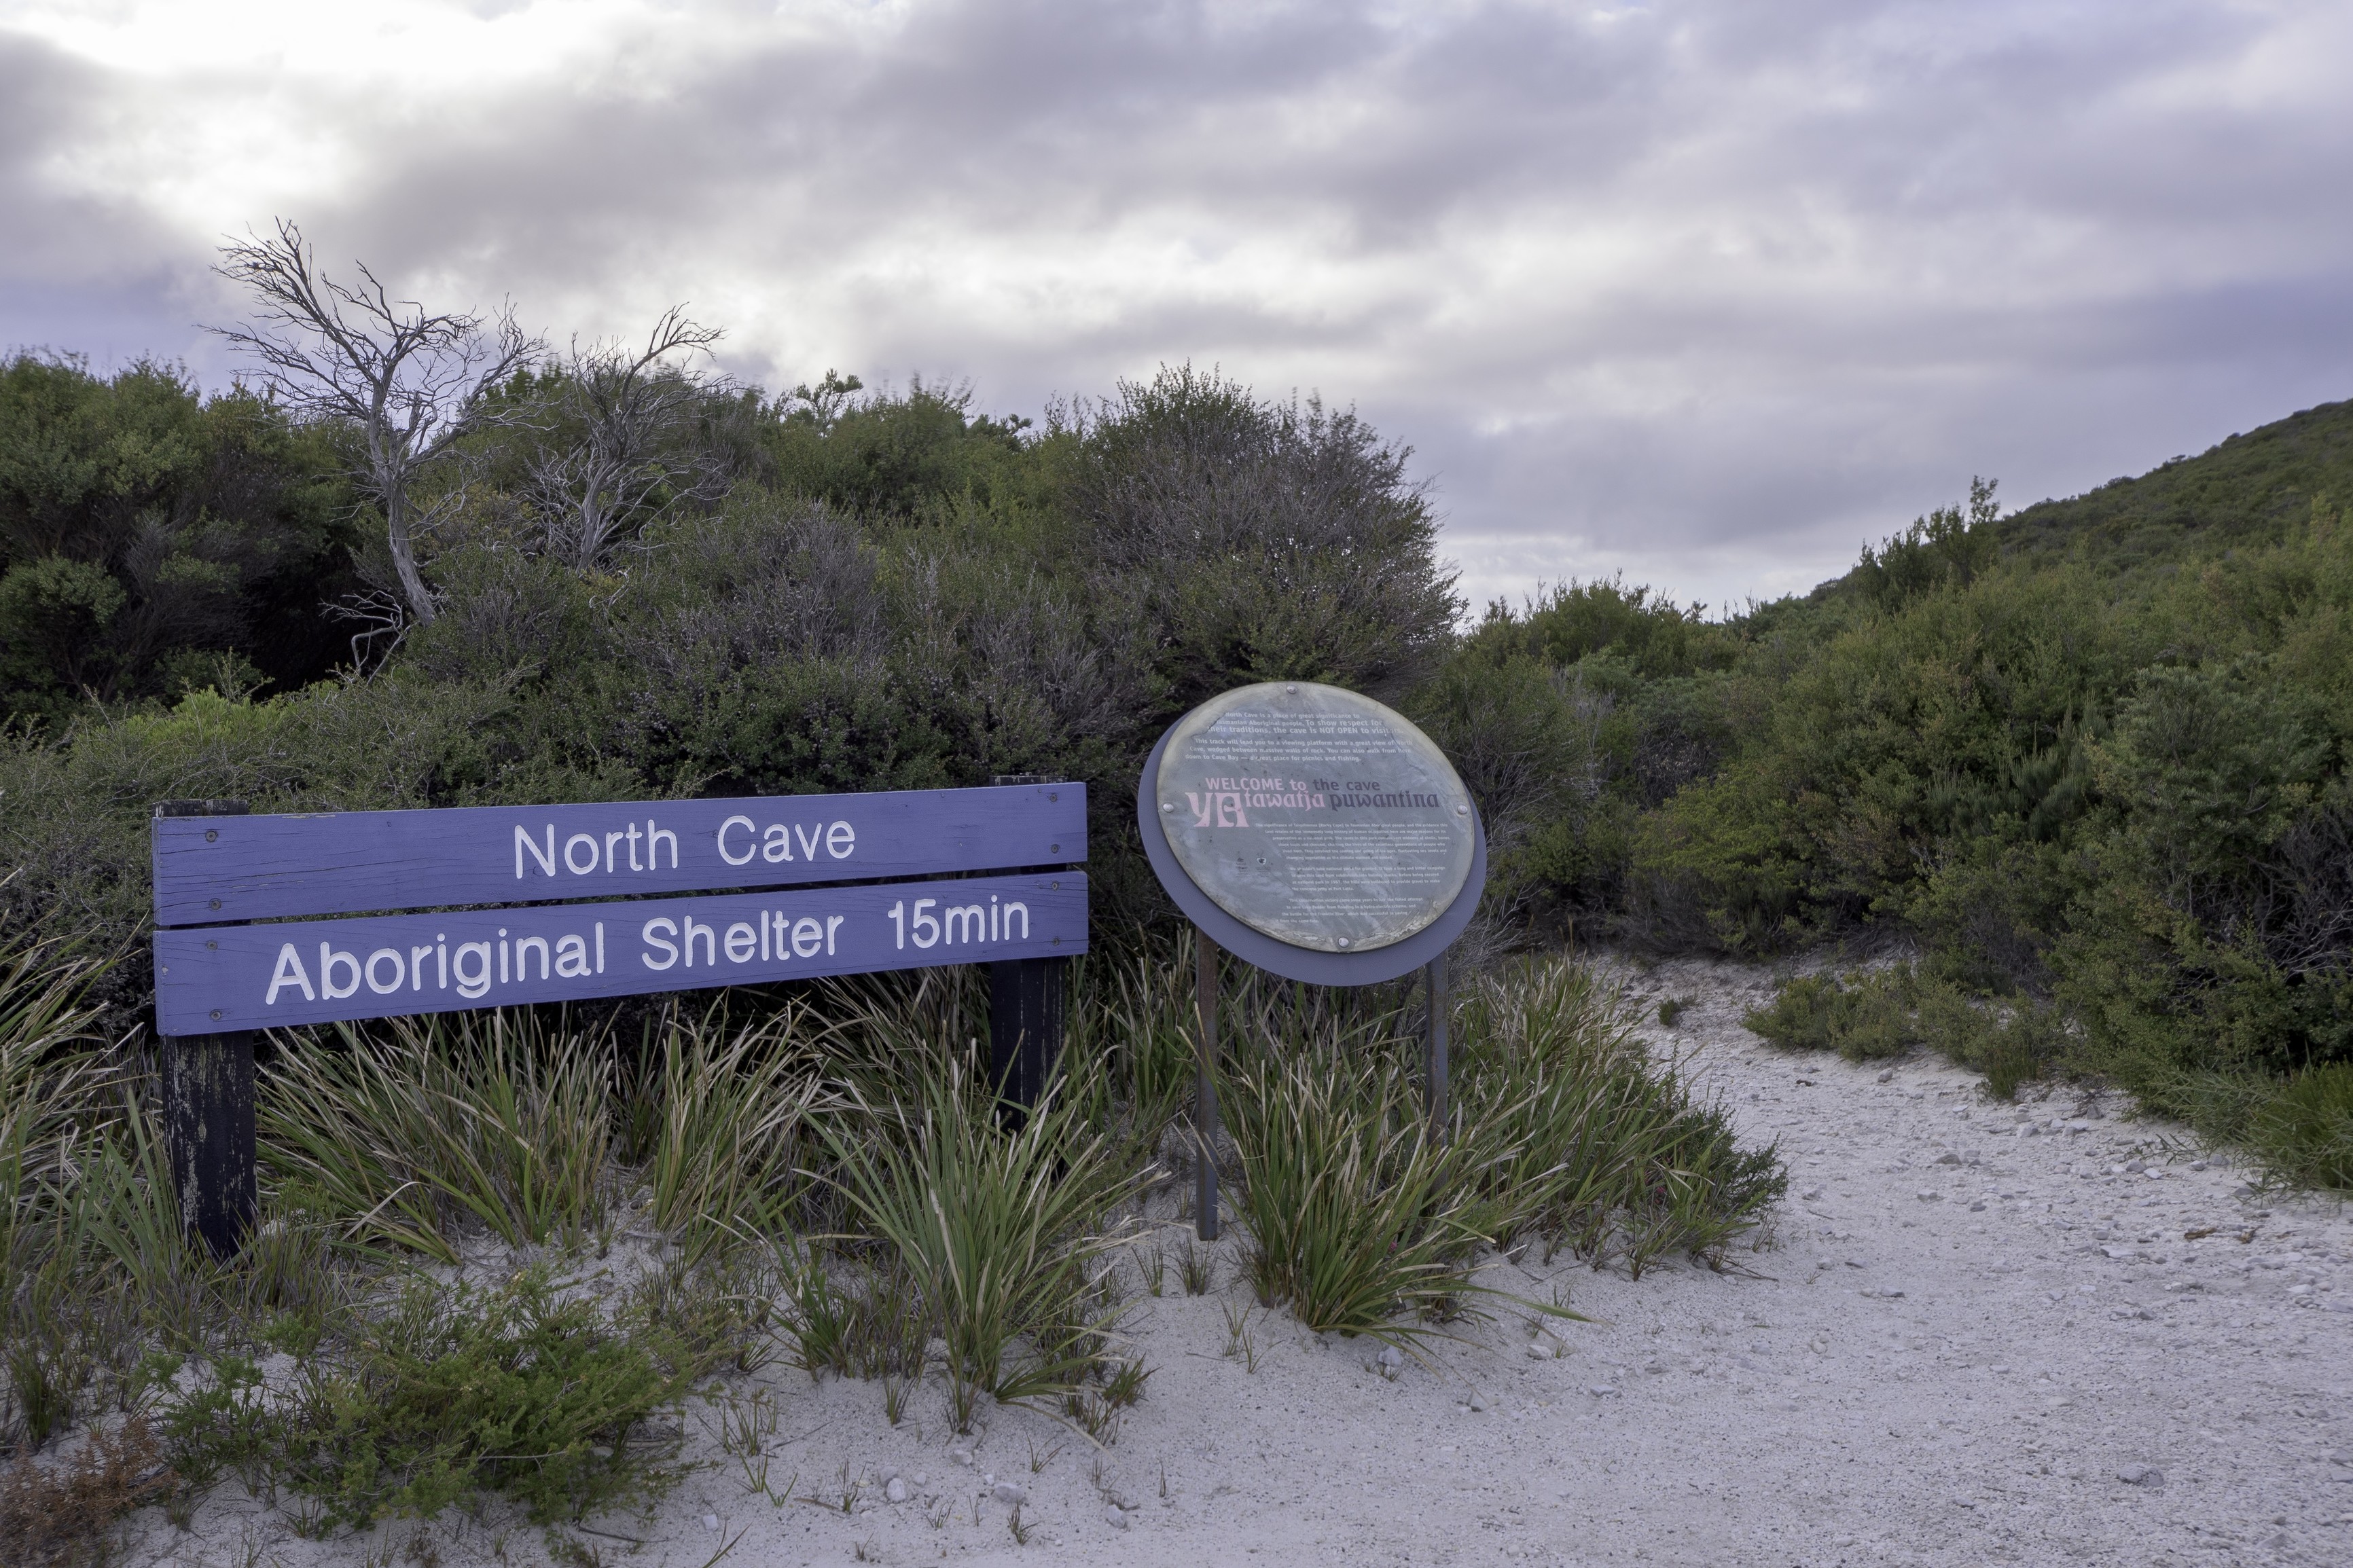 Image of the North Cave sign on the Rocky Cape National Park.